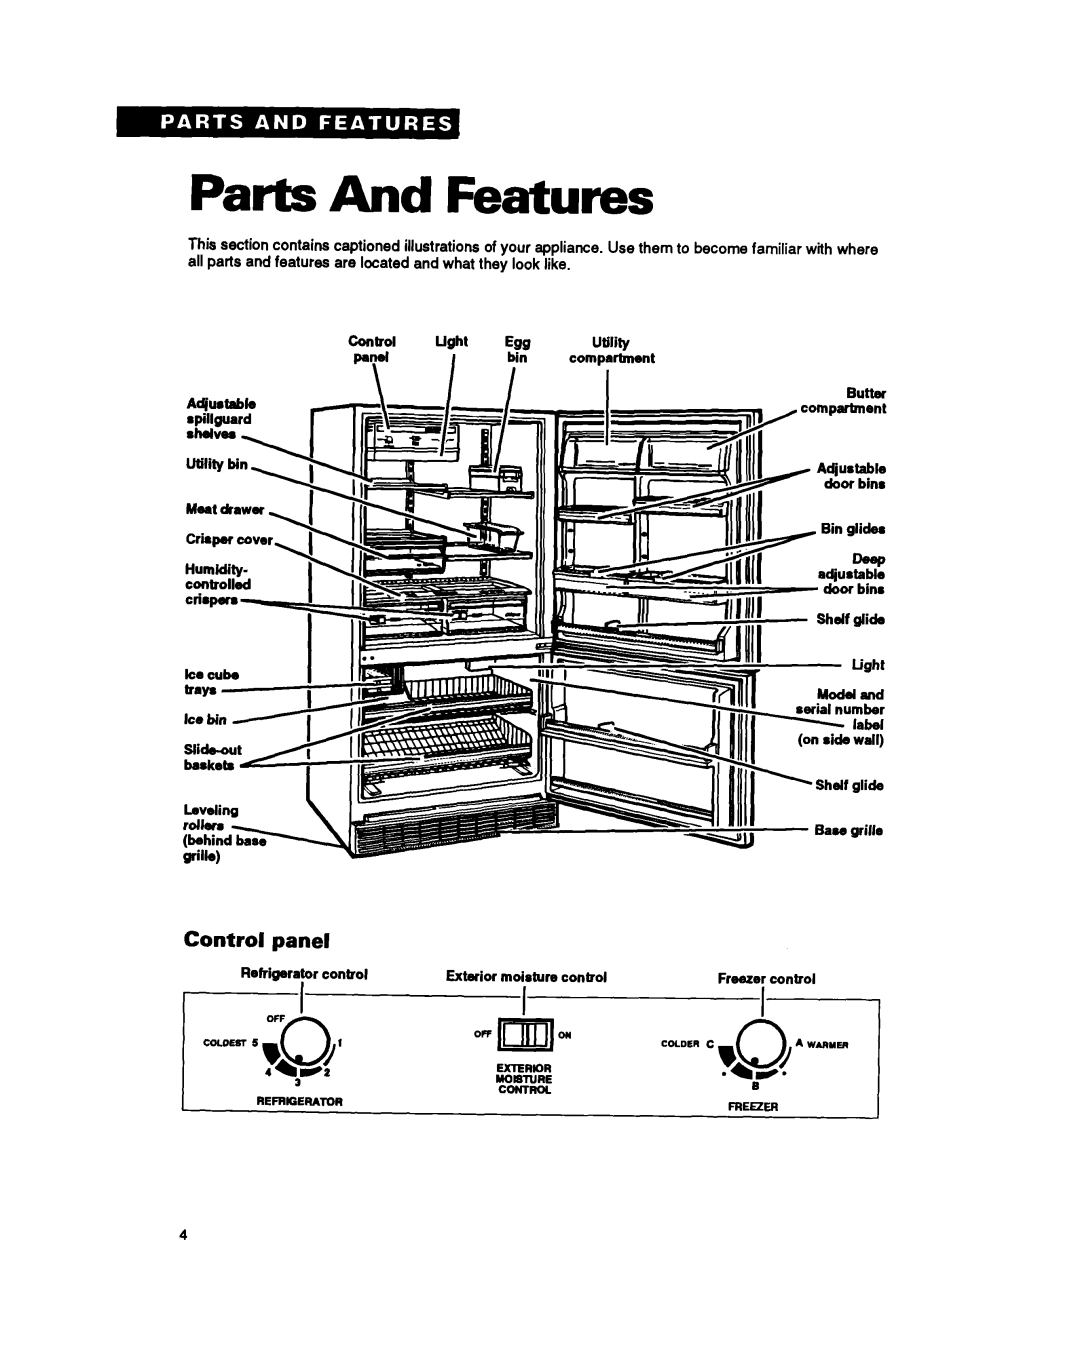 Whirlpool EB21DK warranty Parts And Features, panel, Control, Rebigewator control, Freezer control 